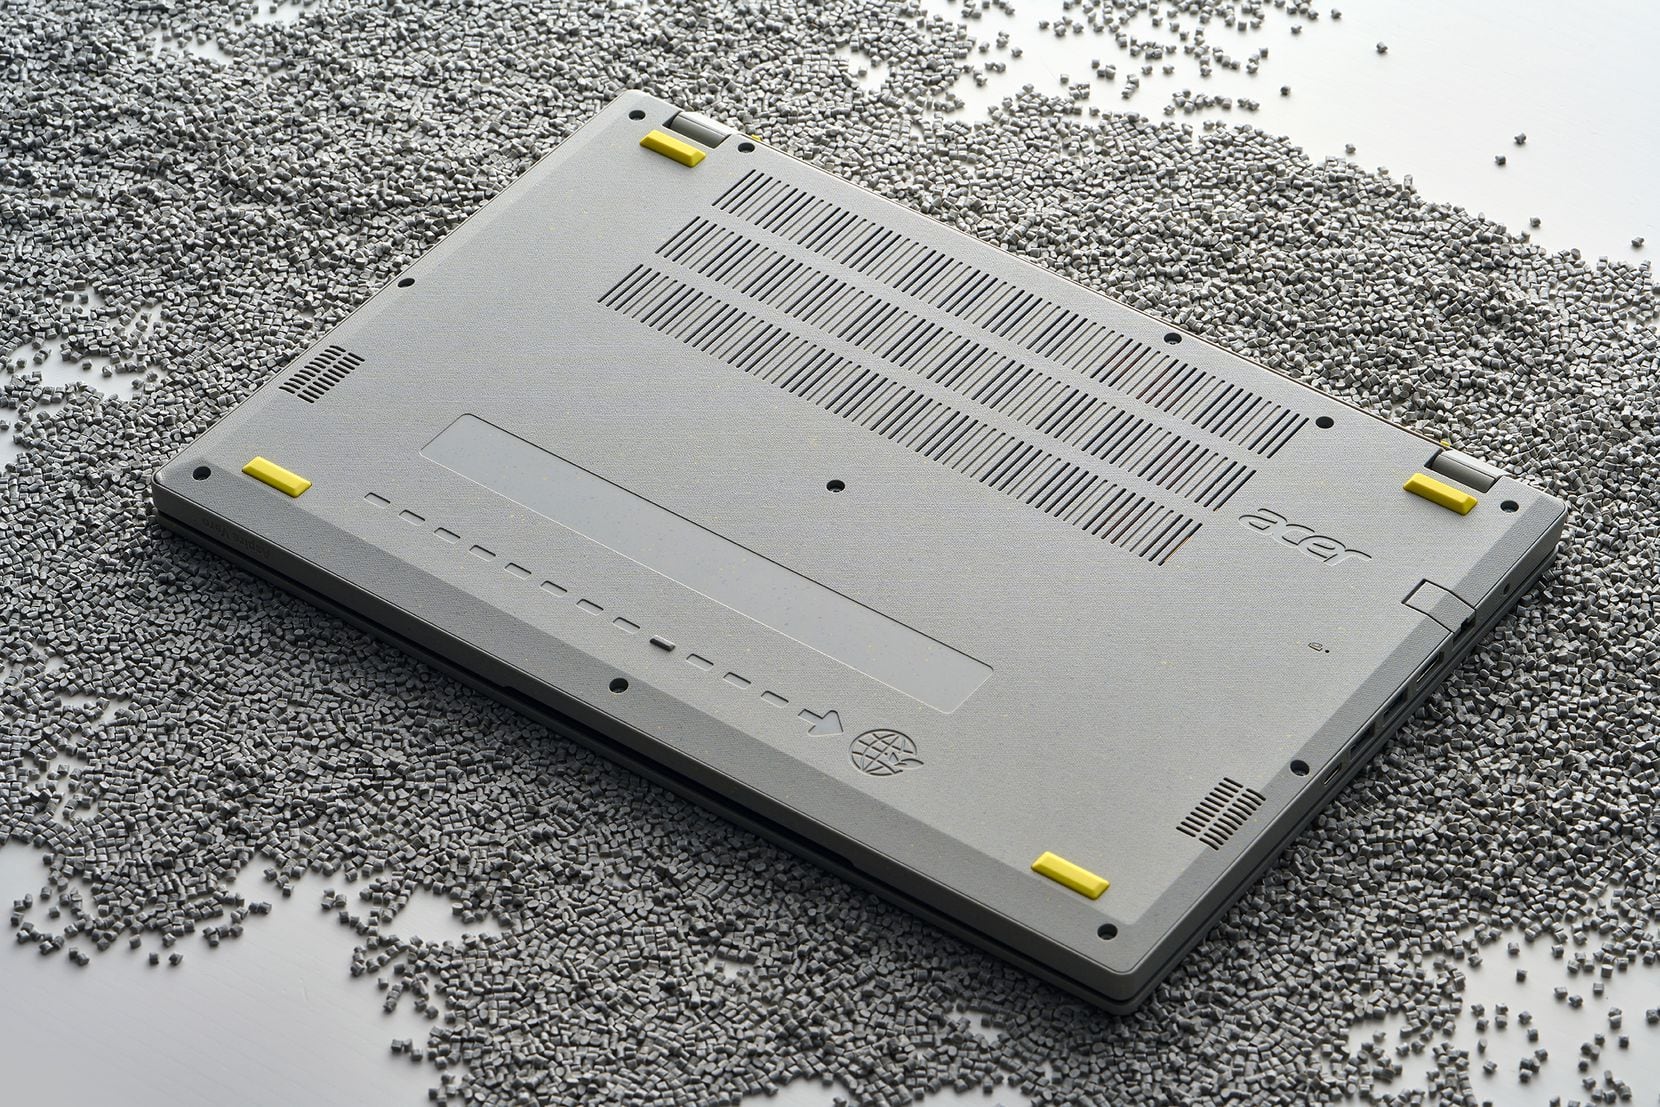 The Acer Aspire Vero has a gray case flecked with dark gray and yellow.